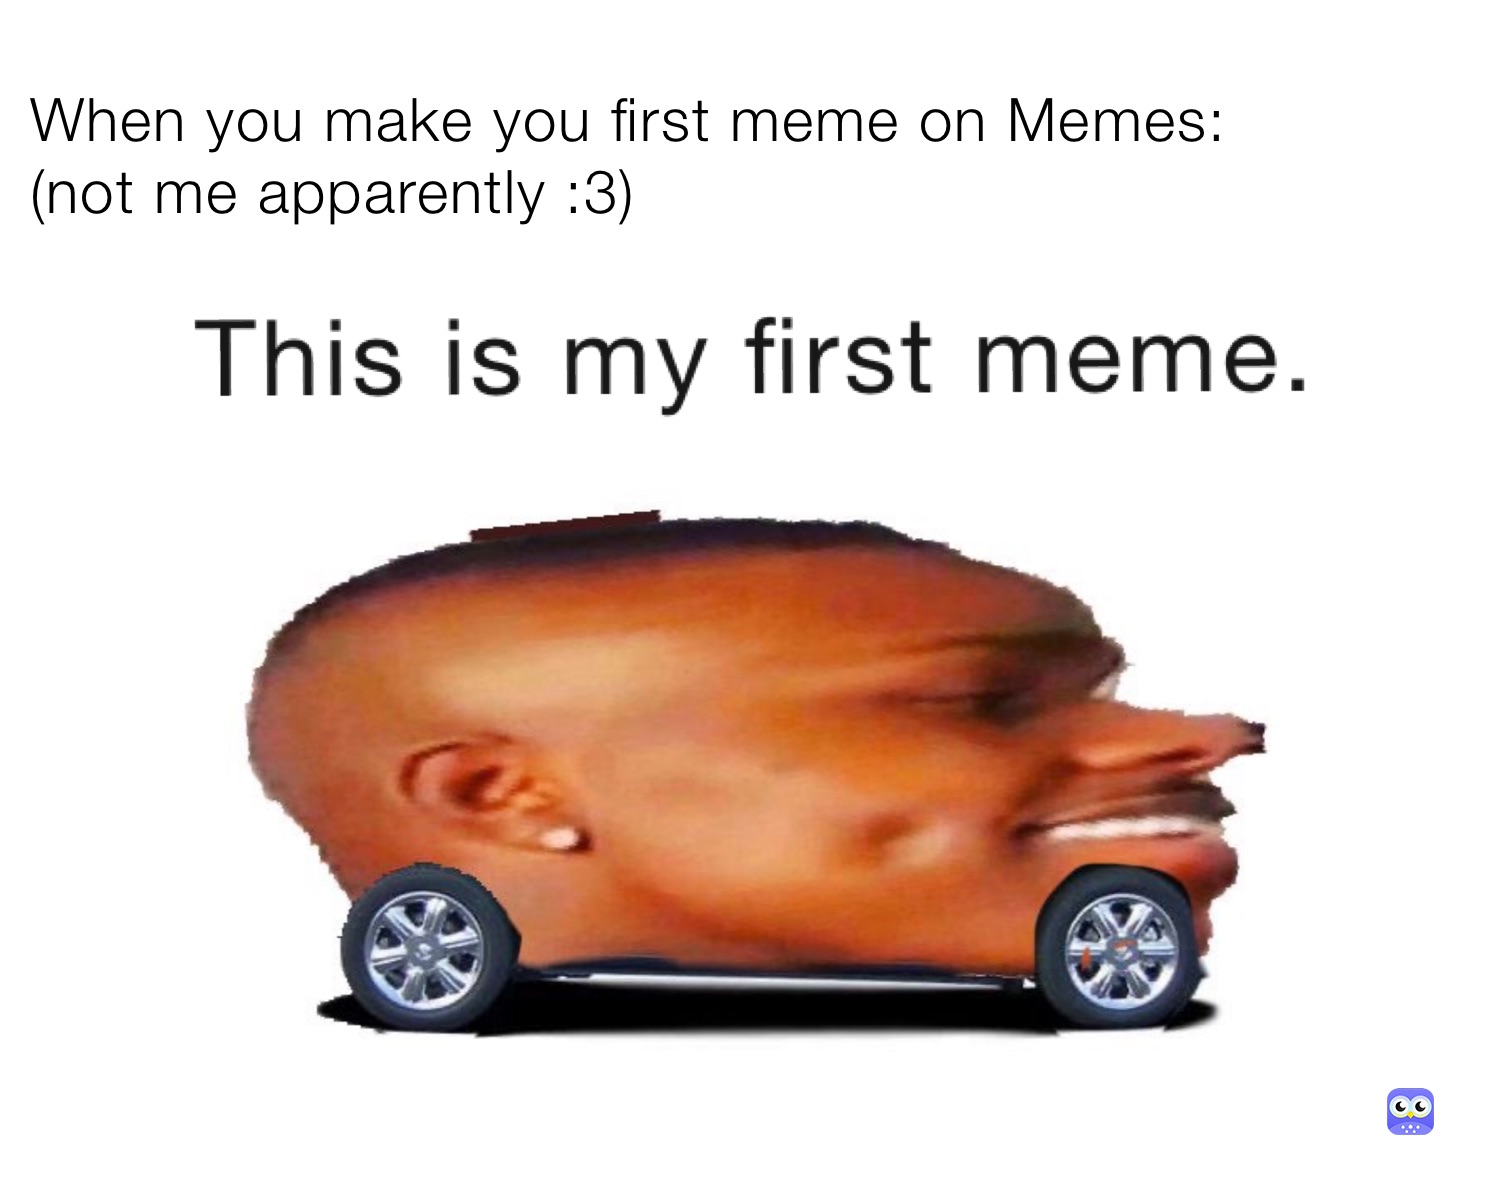 When you make you first meme on Memes:
(not me apparently :3)
